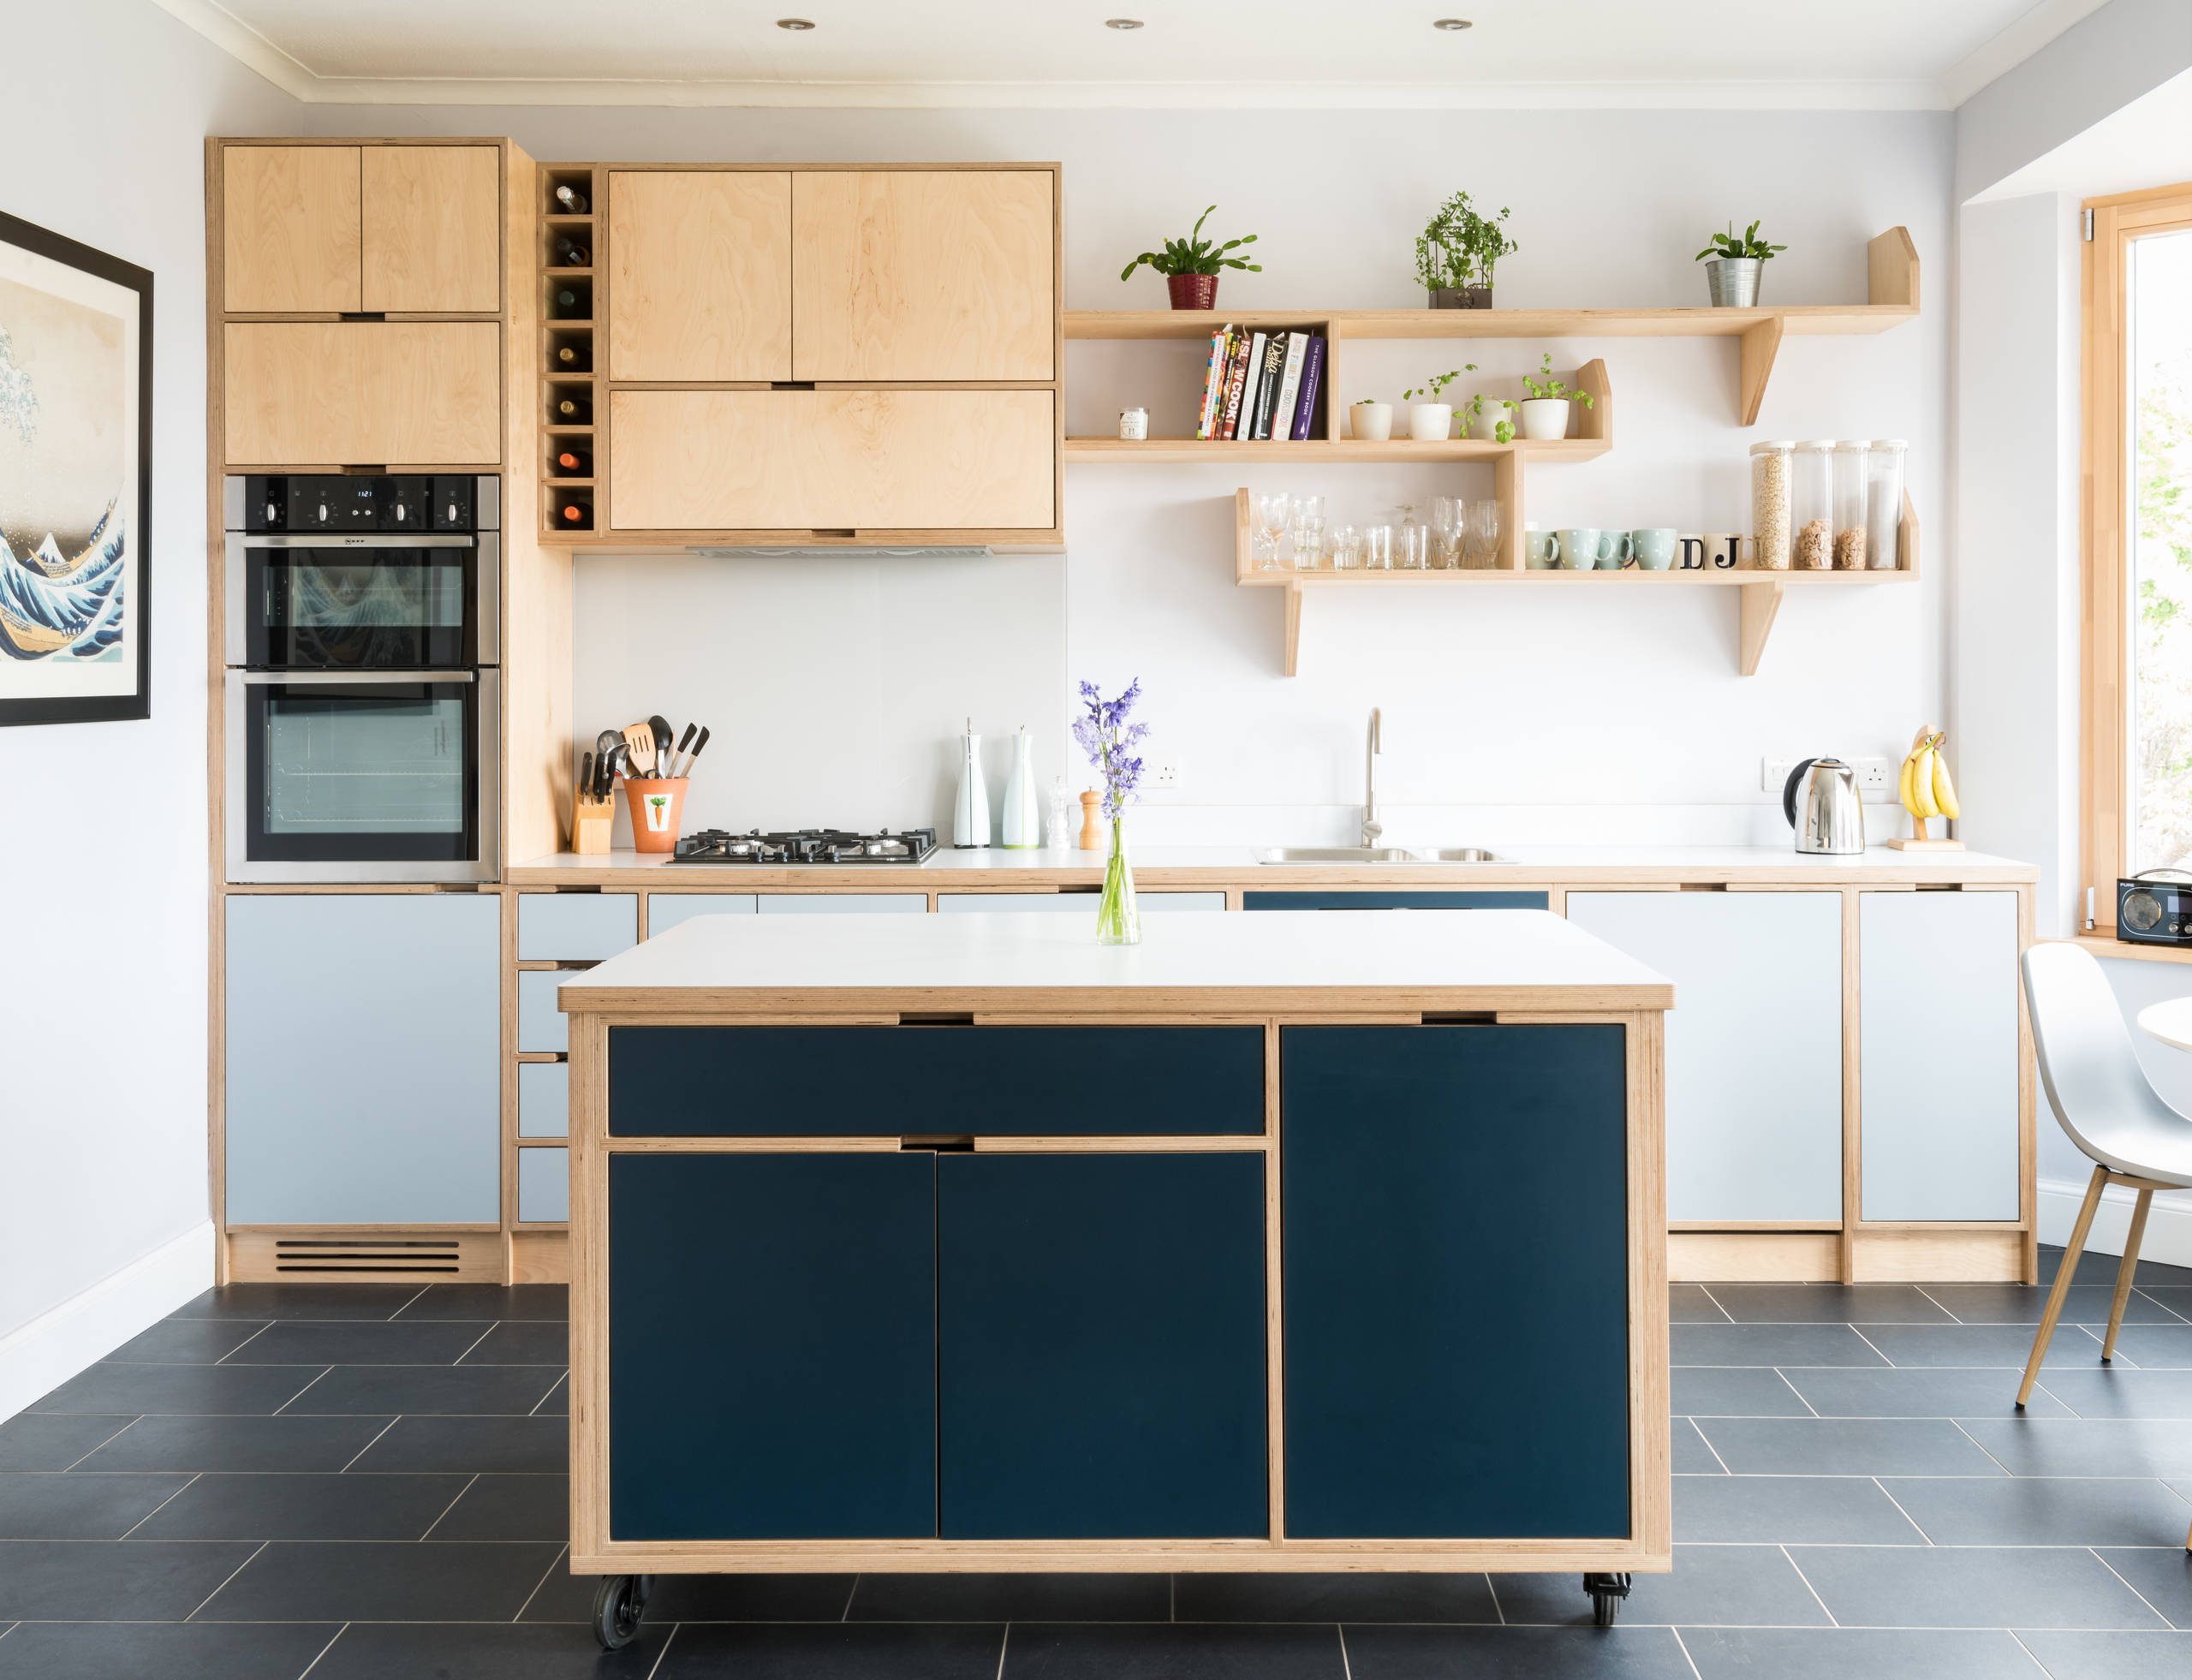 https://st.hzcdn.com/simgs/pictures/kitchens/striking-and-simple-birch-plywood-kitchen-in-edinburgh-birkwood-img~73a18c8a0afd4cb8_14-0497-1-9c0e3c9.jpg